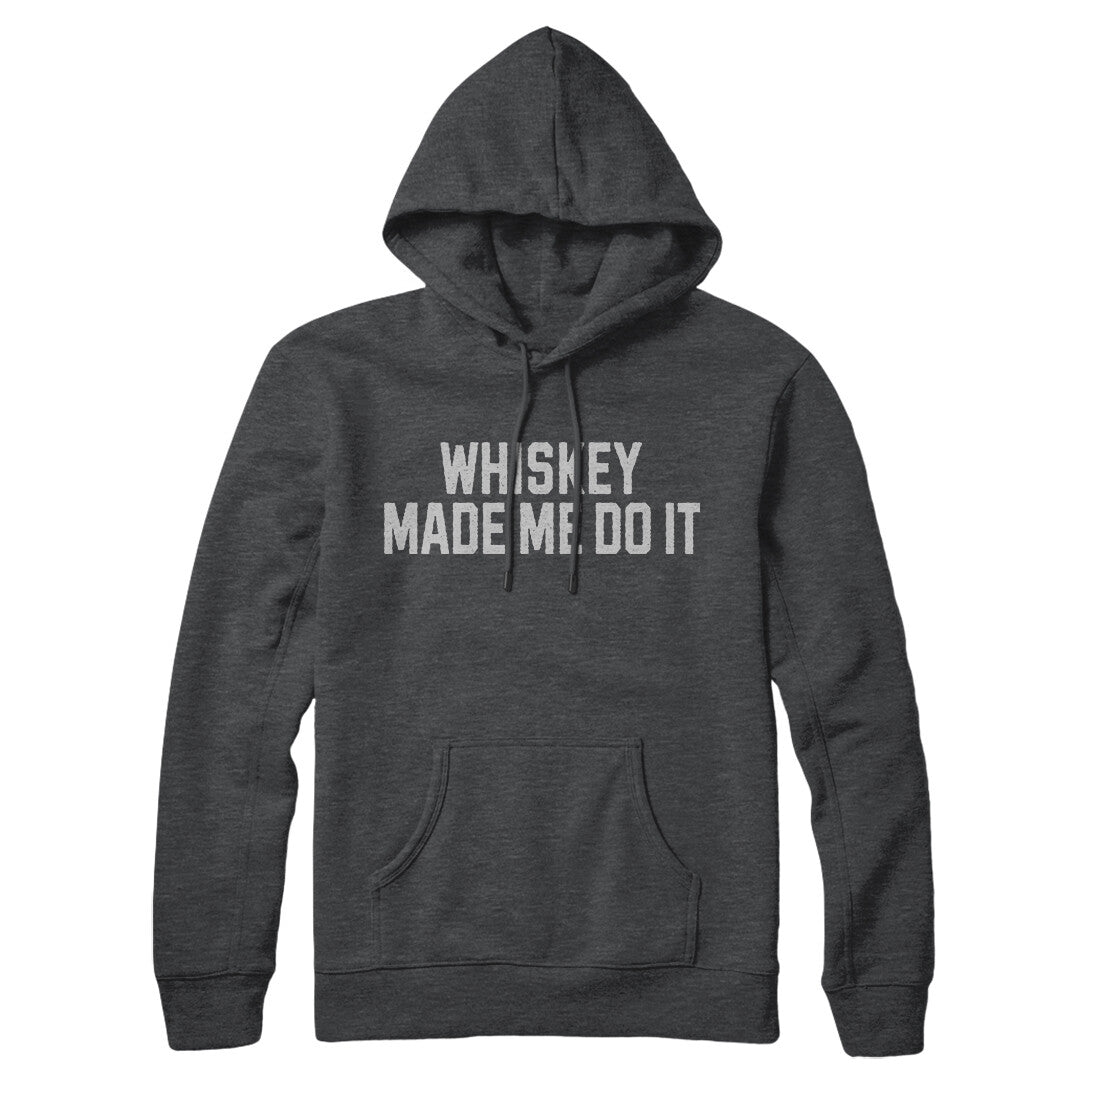 Whiskey Made Me Do It in Charcoal Heather Color